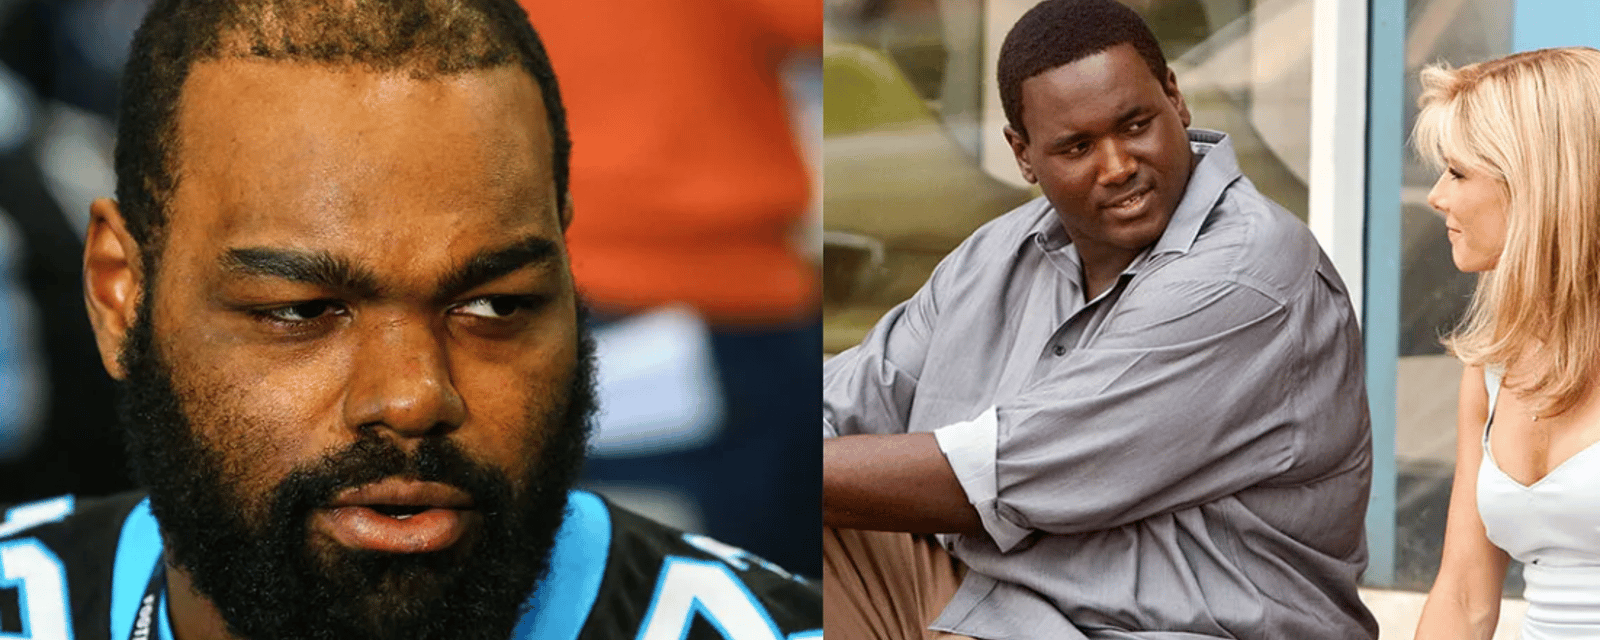 Shocking truth of “The Blind Side” comes out 